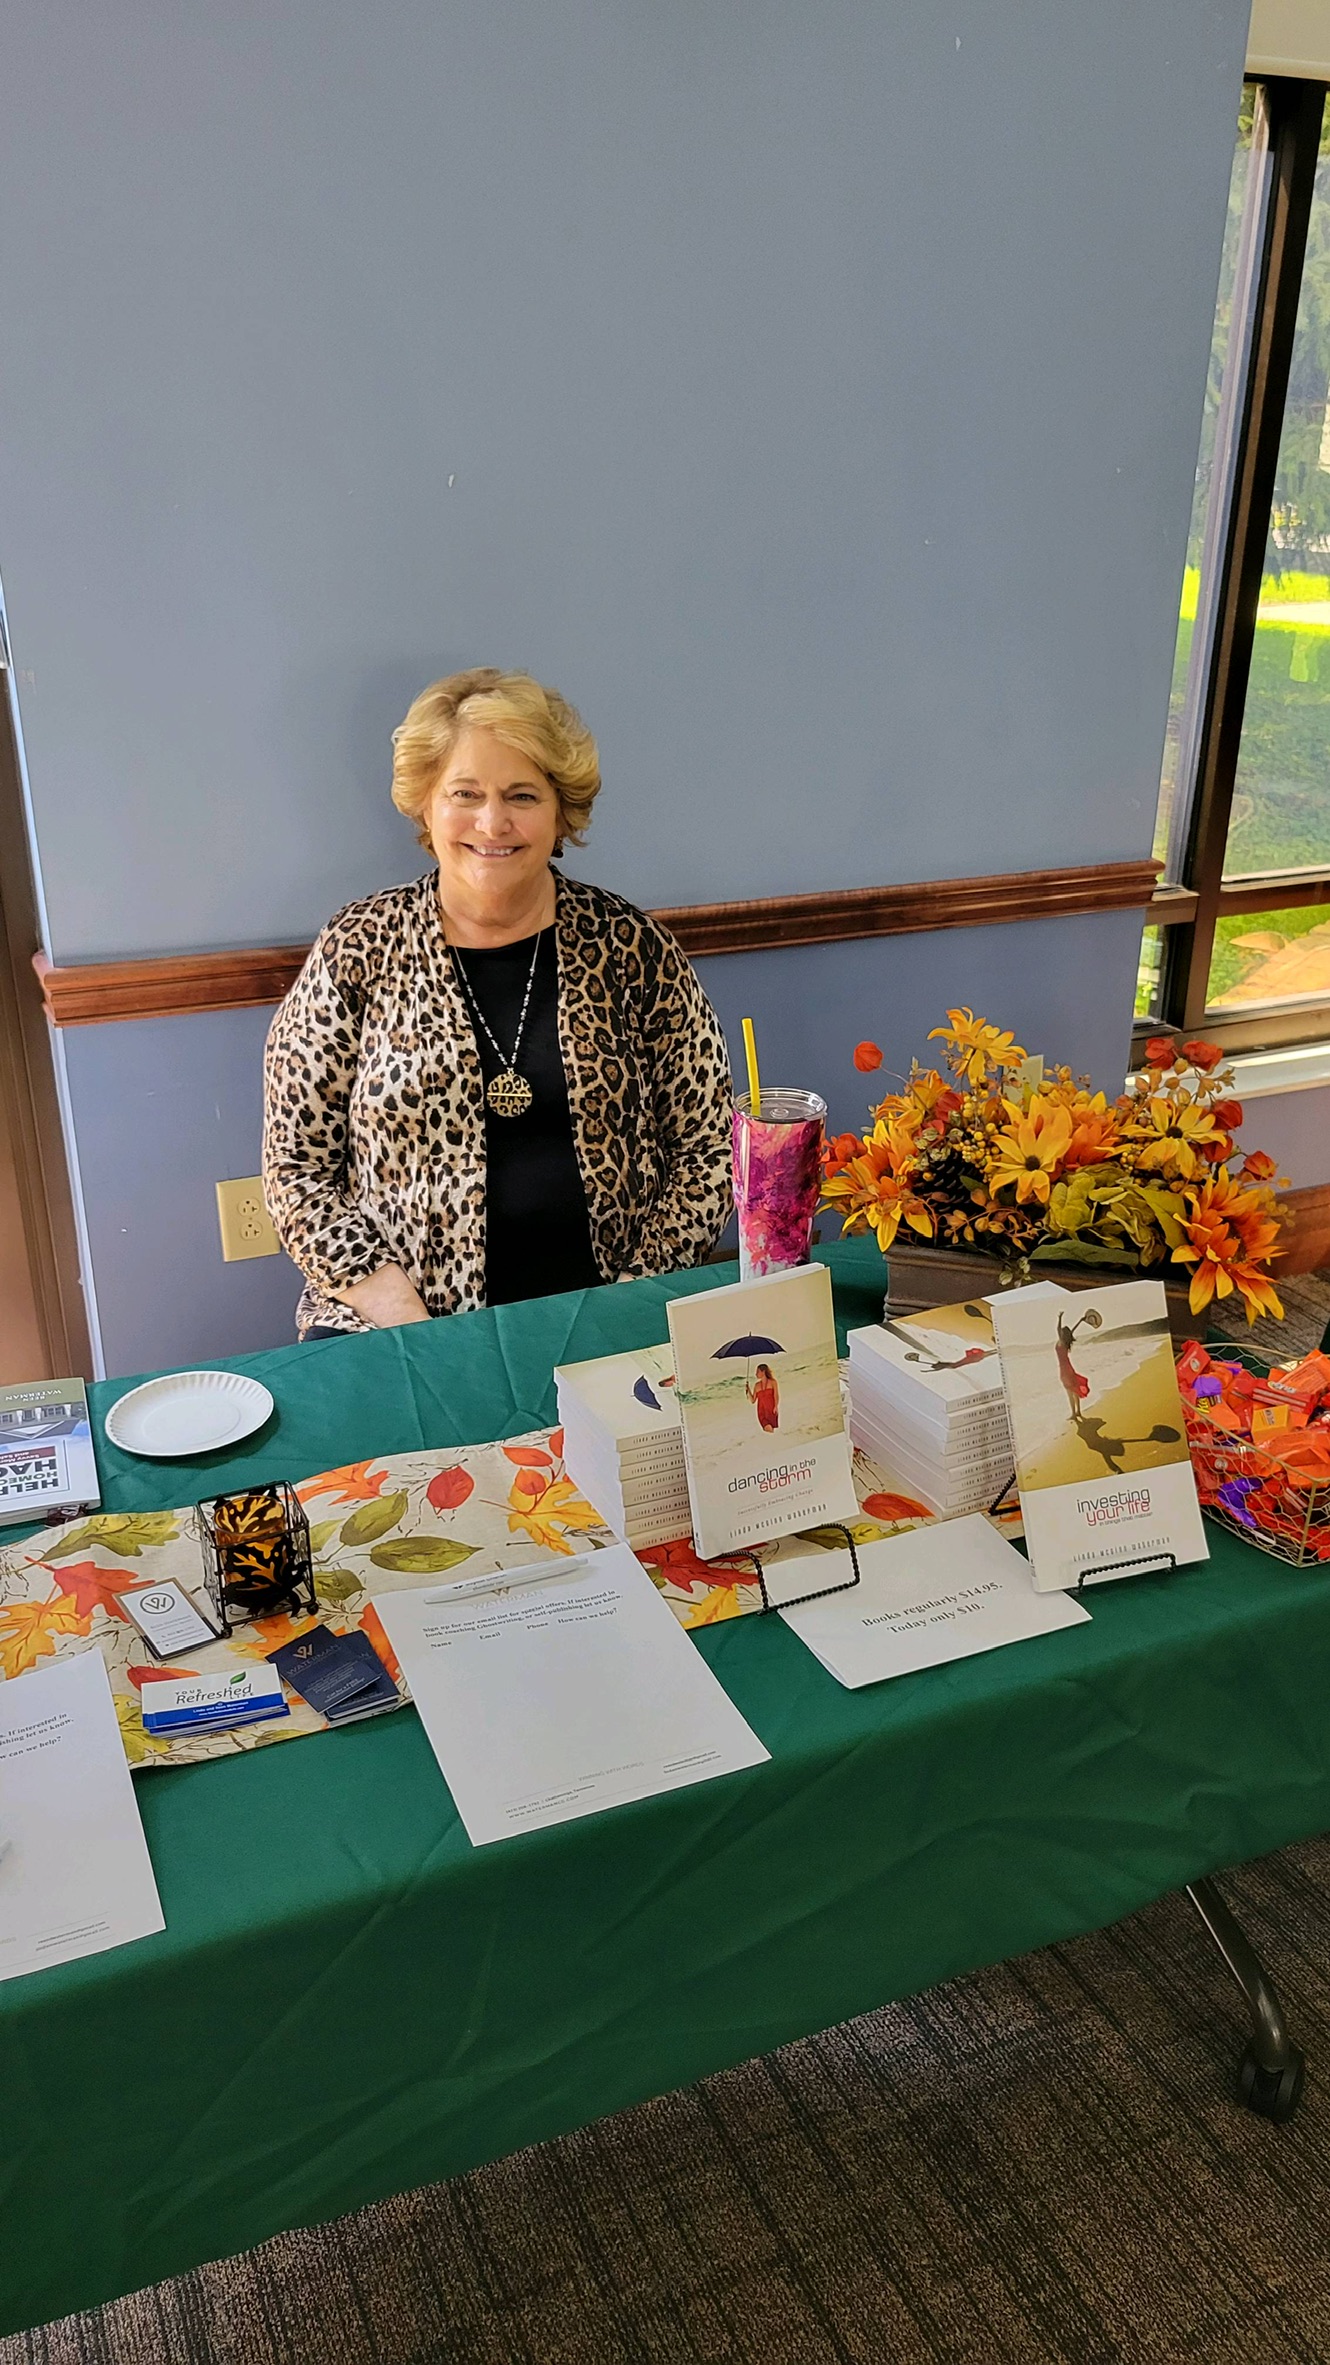 Linda Waterman at an author event in Chattanooga, Tennessee